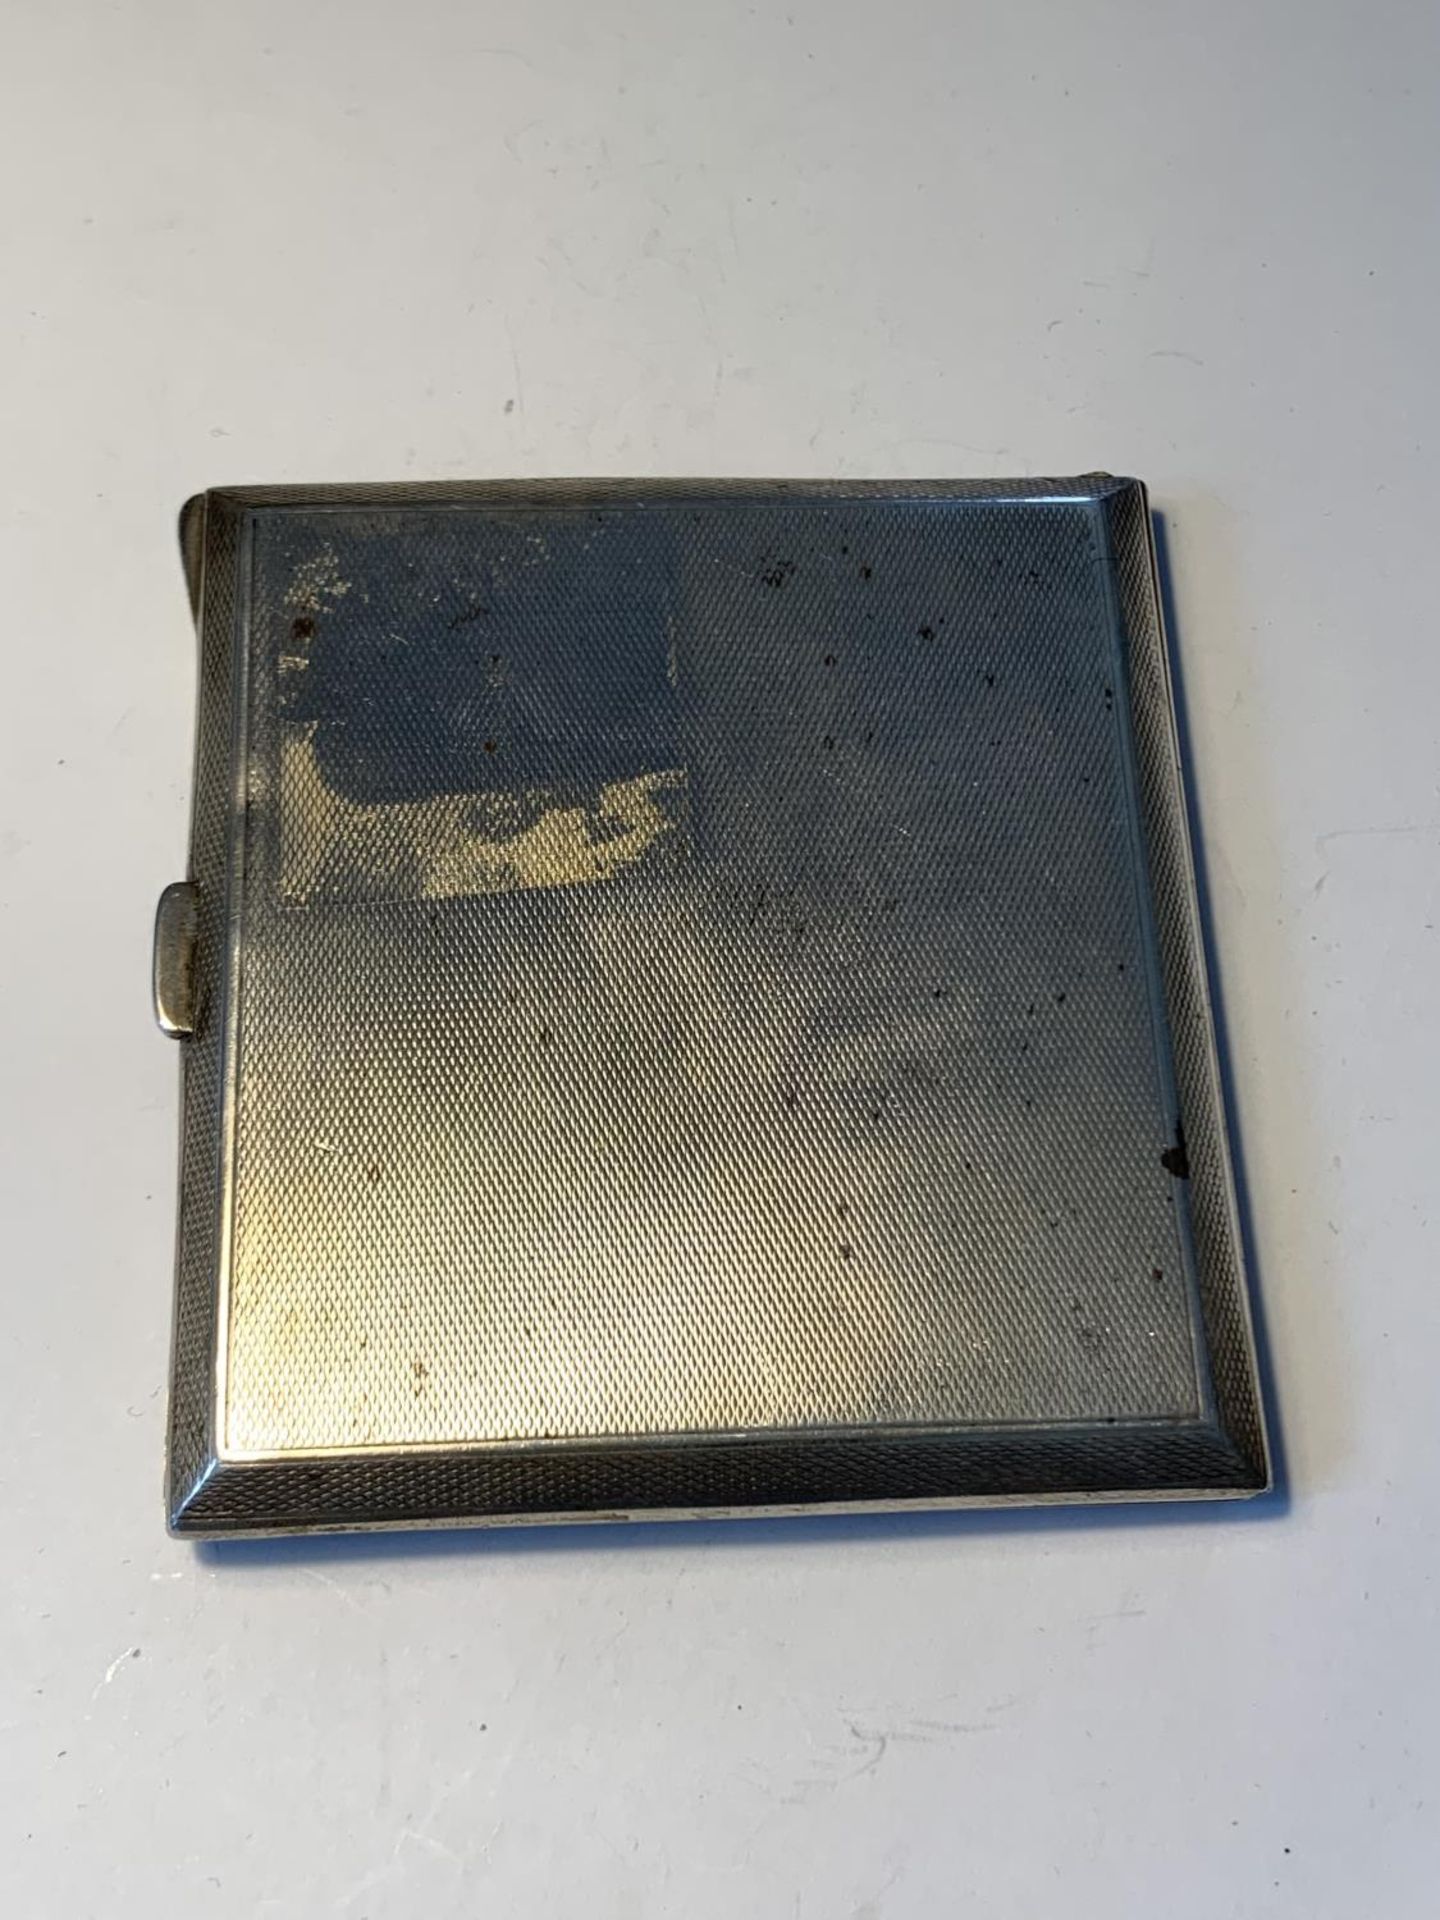 A HALLMARKED BIRMINGHAM 1919 SILVER CIGARETTE CASE GROSS WEIGHT 88.2 GRAMS - Image 2 of 4